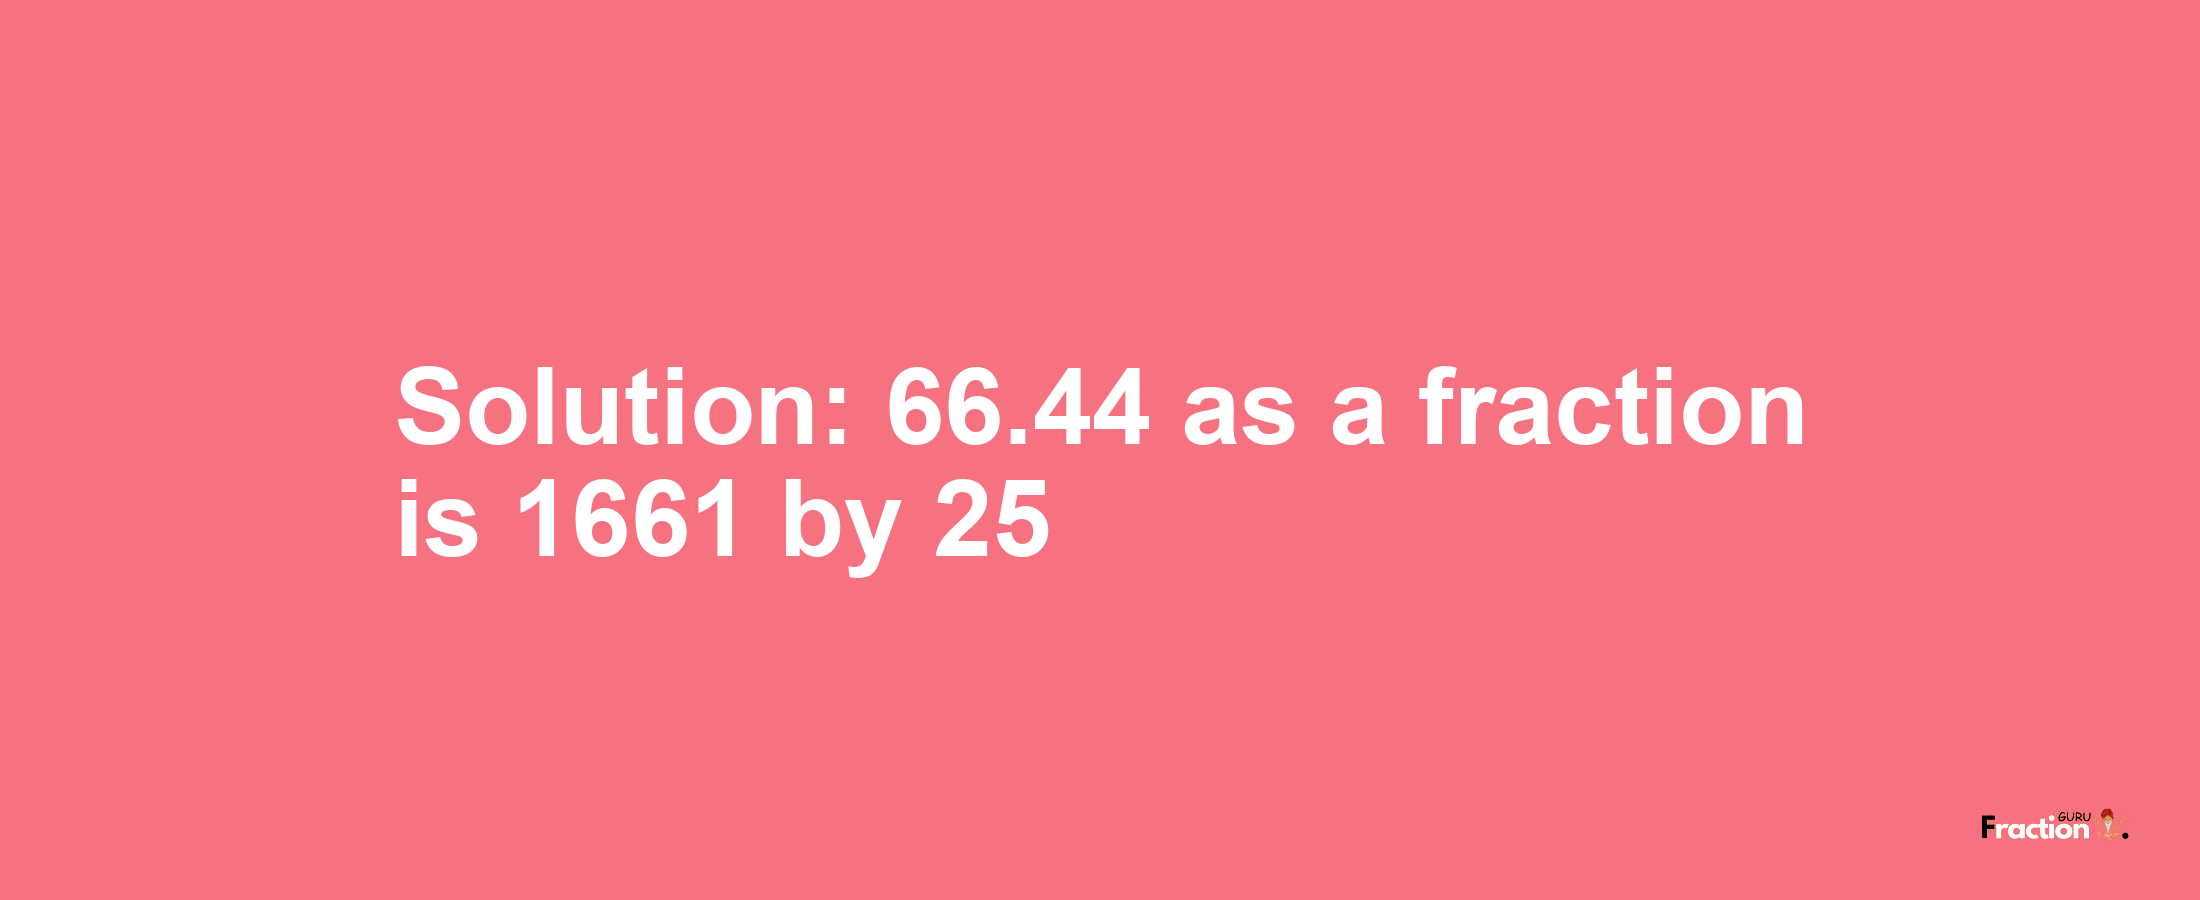 Solution:66.44 as a fraction is 1661/25